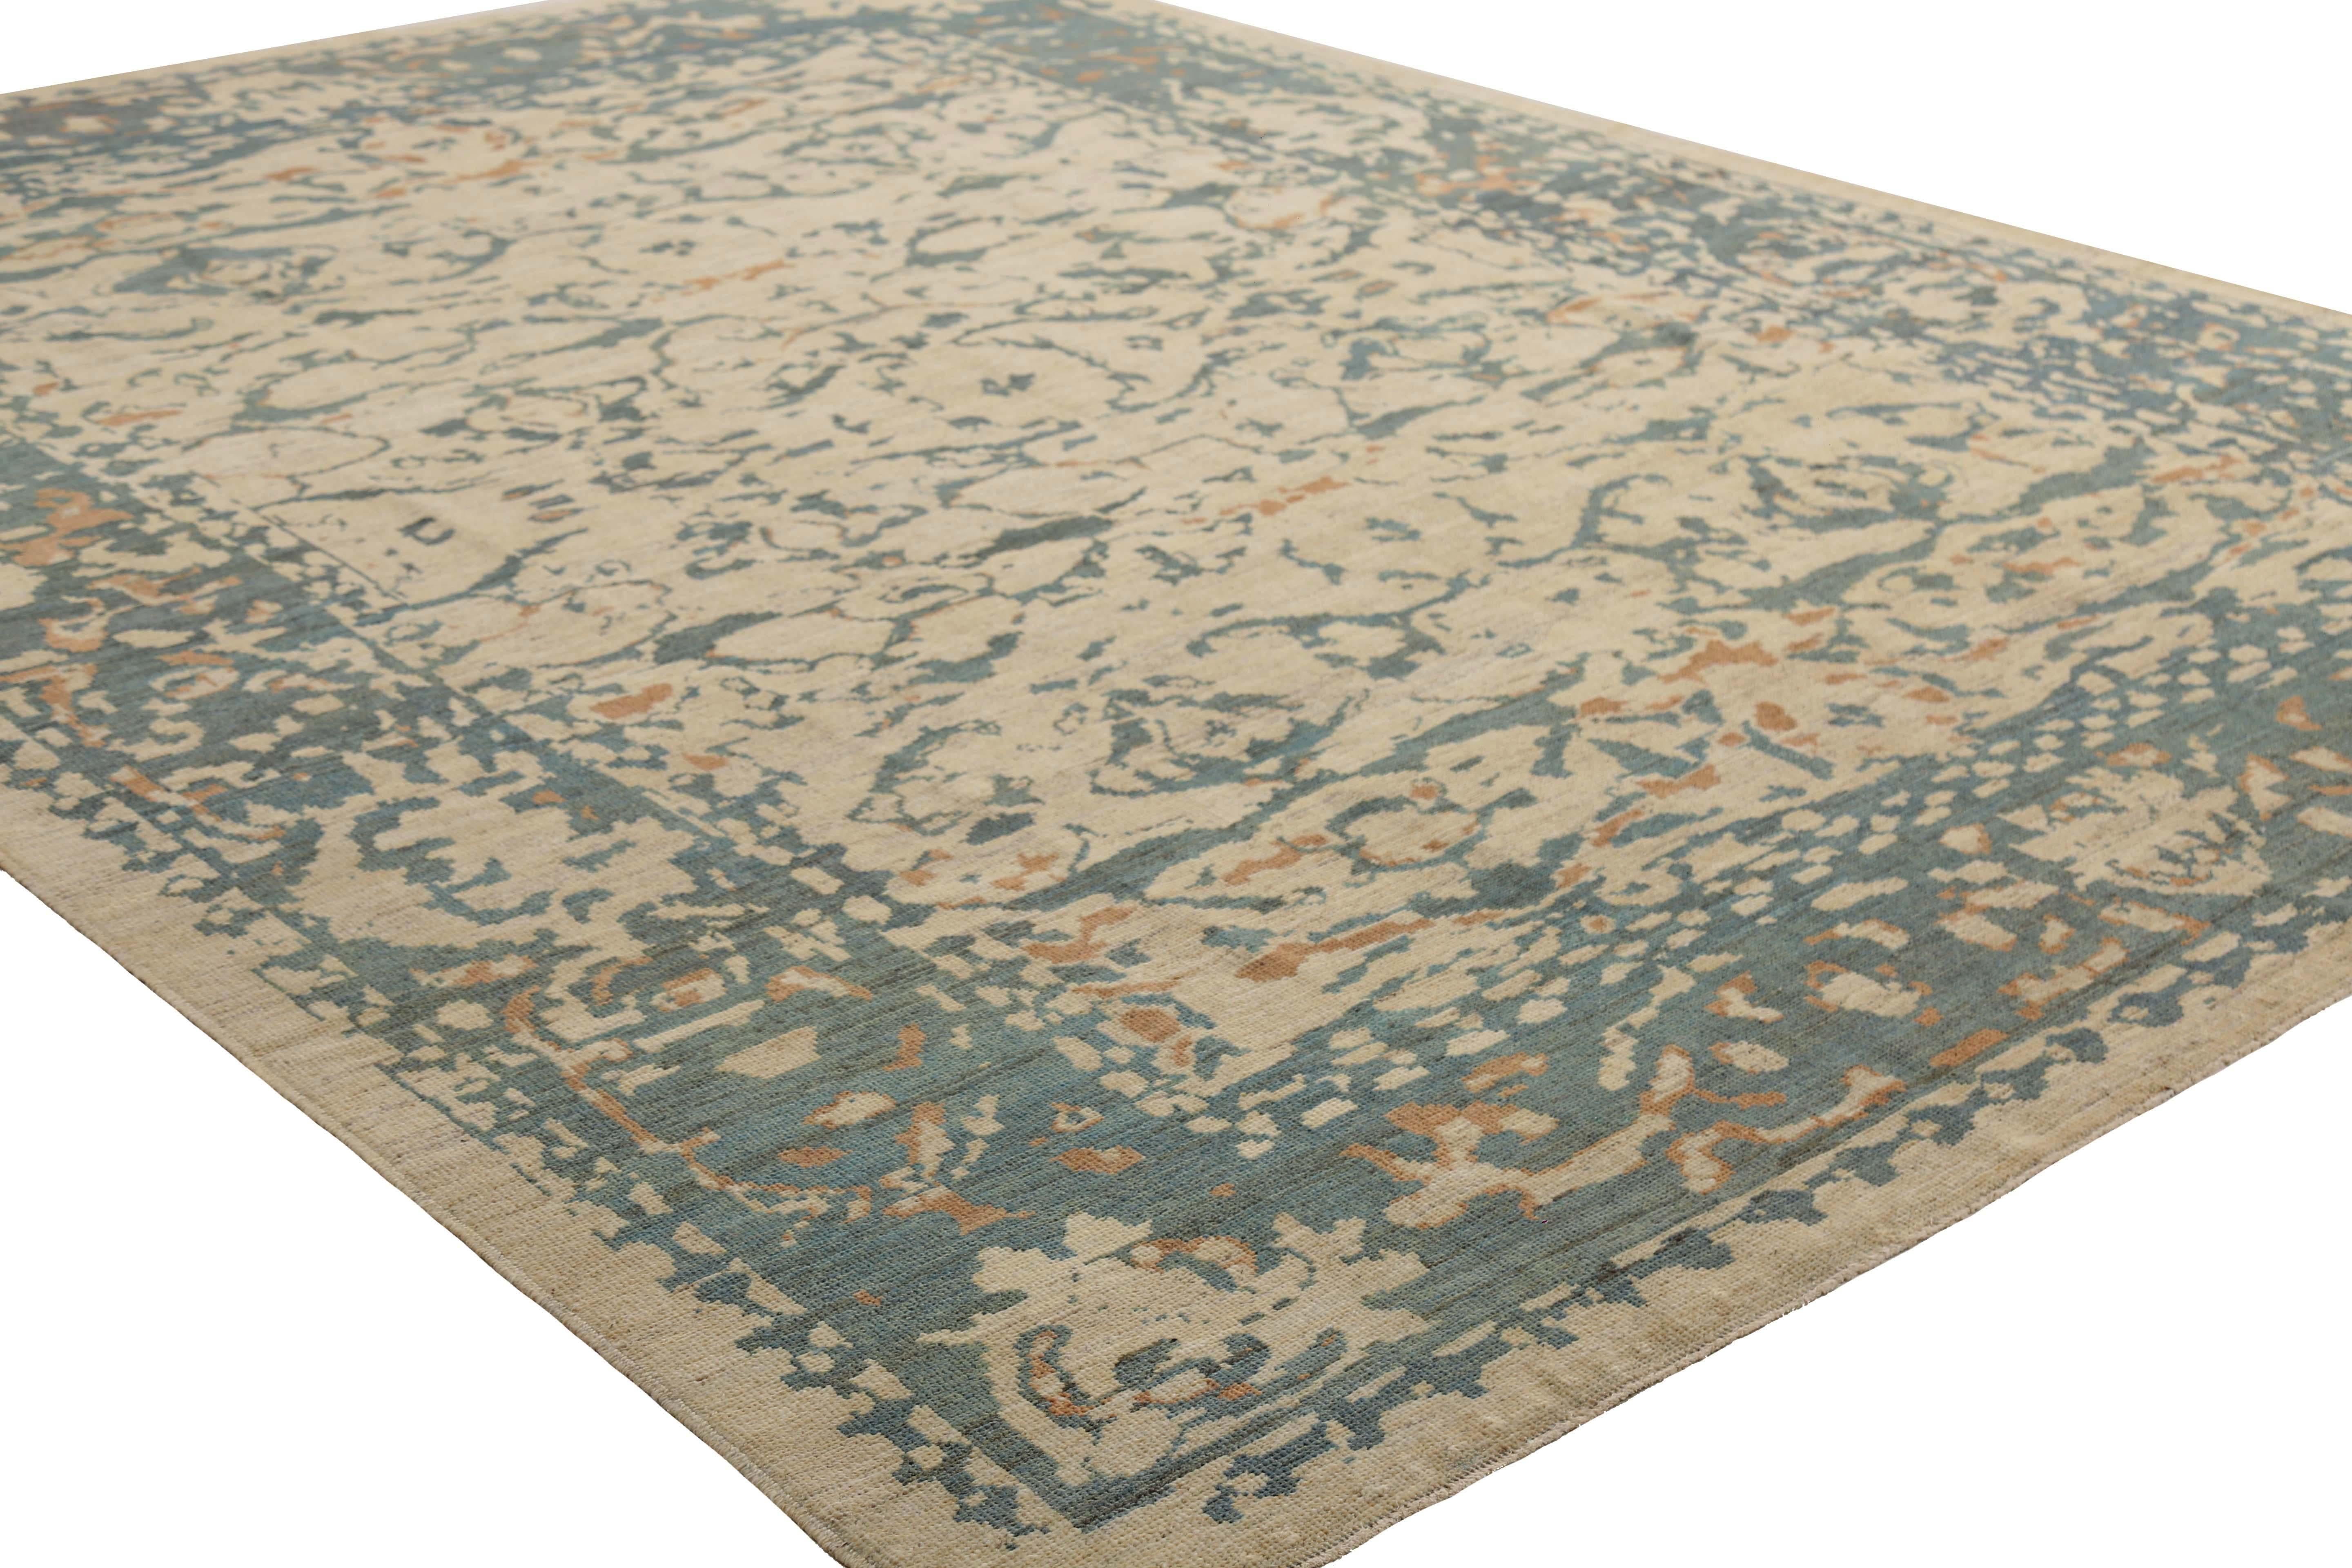 Wool Handmade Turkish Sultanabad Rug - Modern Design with Blue, Green, and Orange Col For Sale